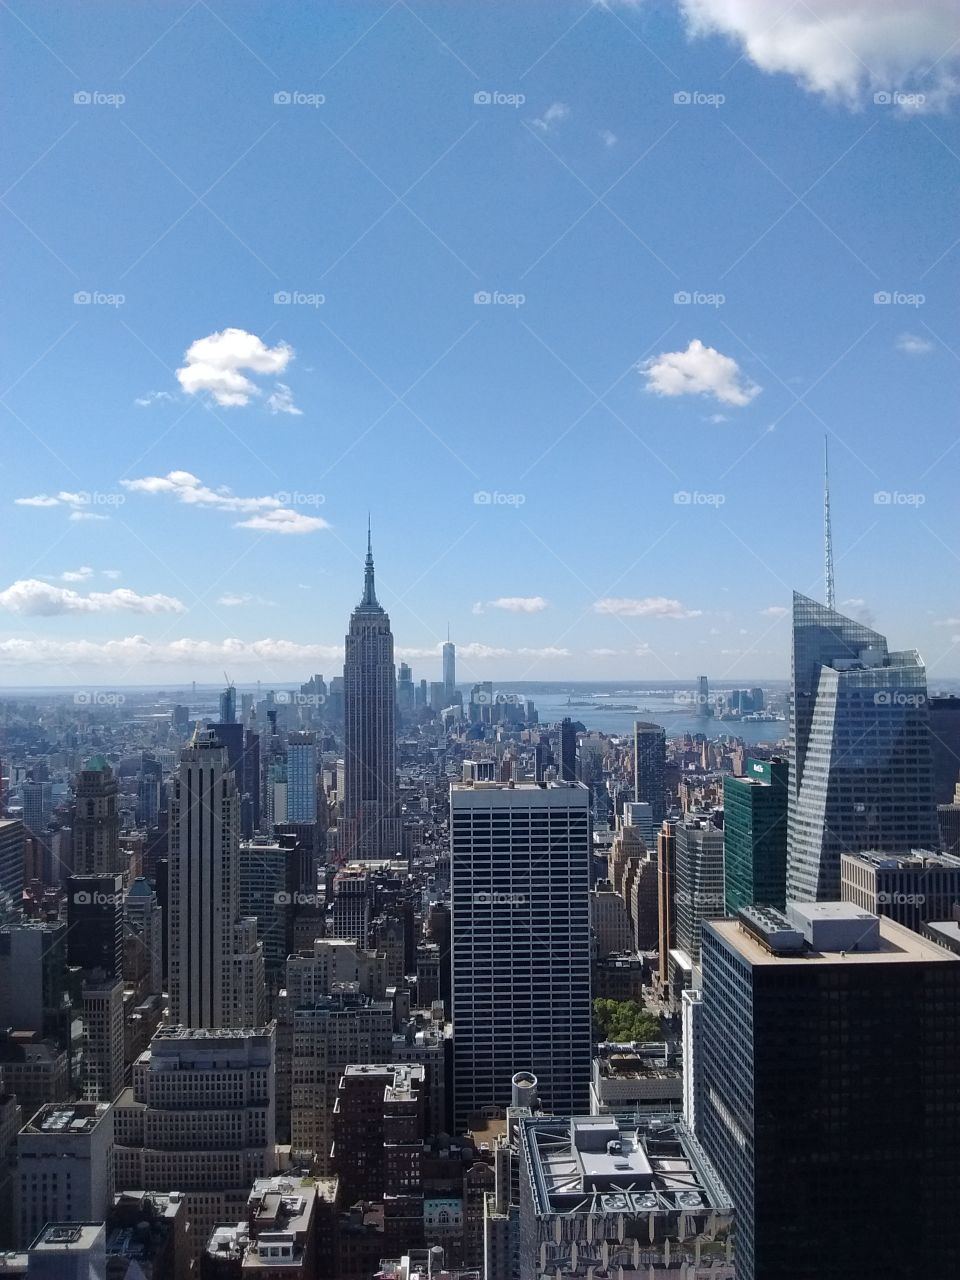 Top of the Rock!